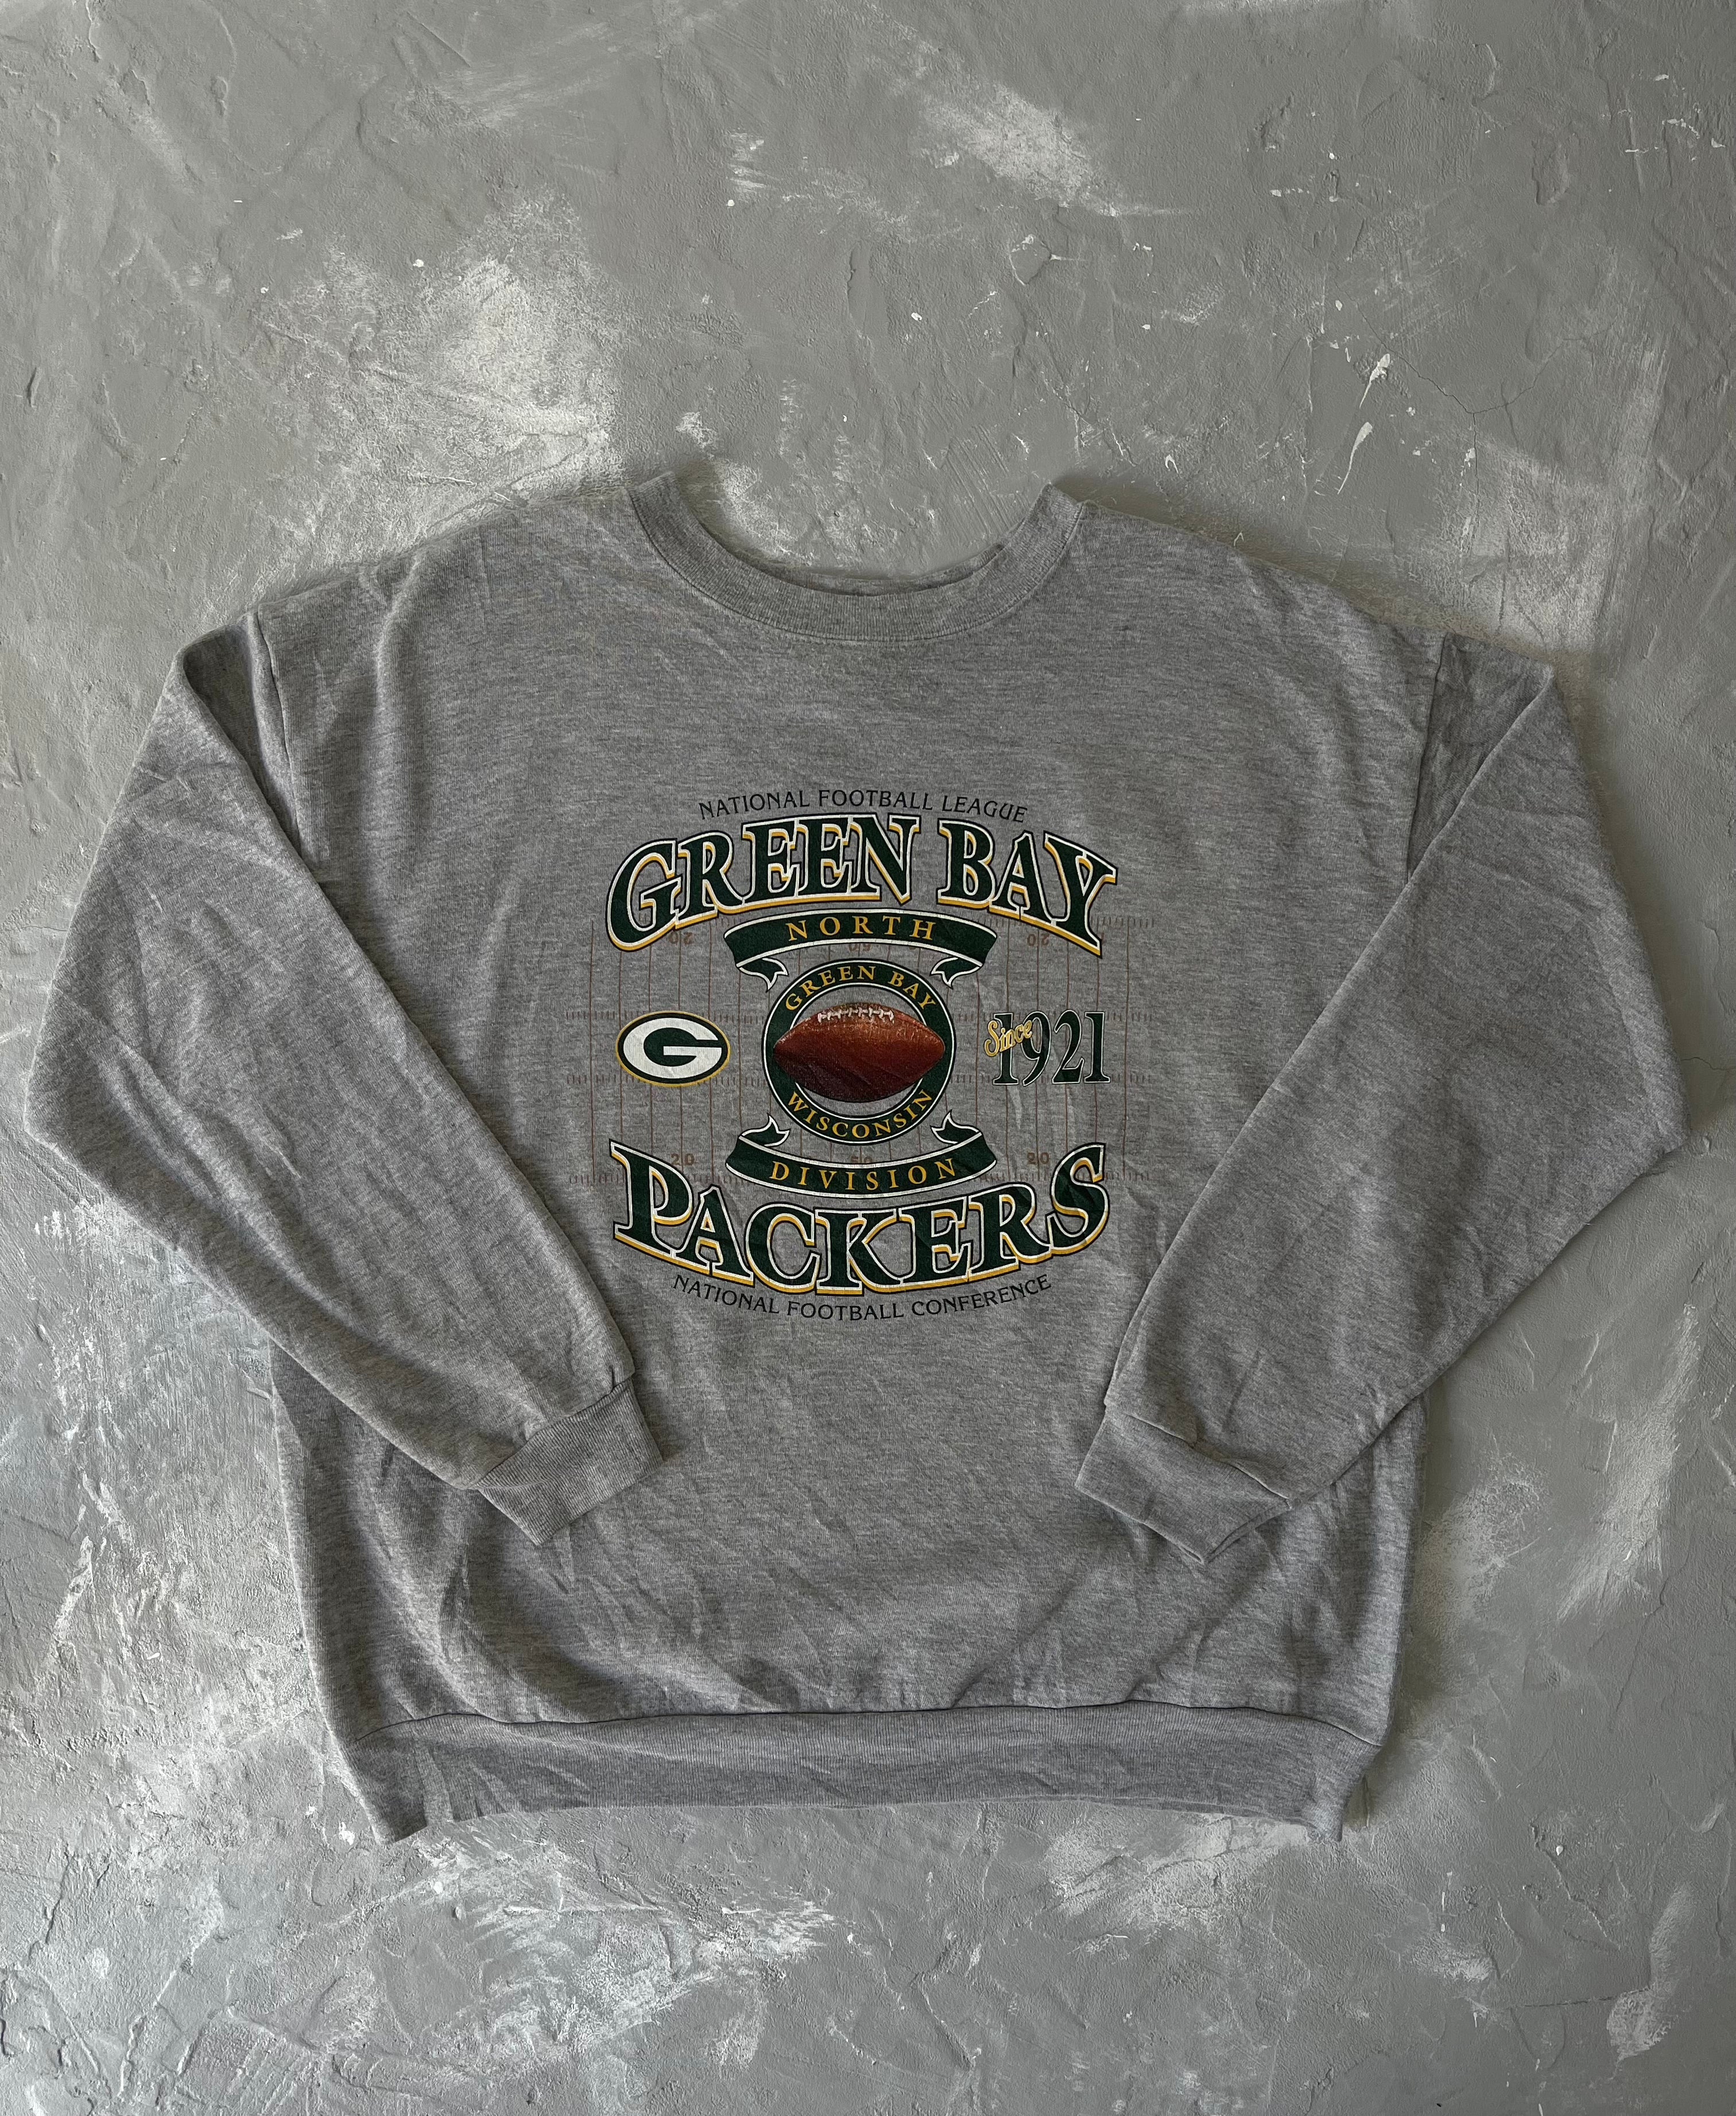 Green Bay Packers Football Sweater